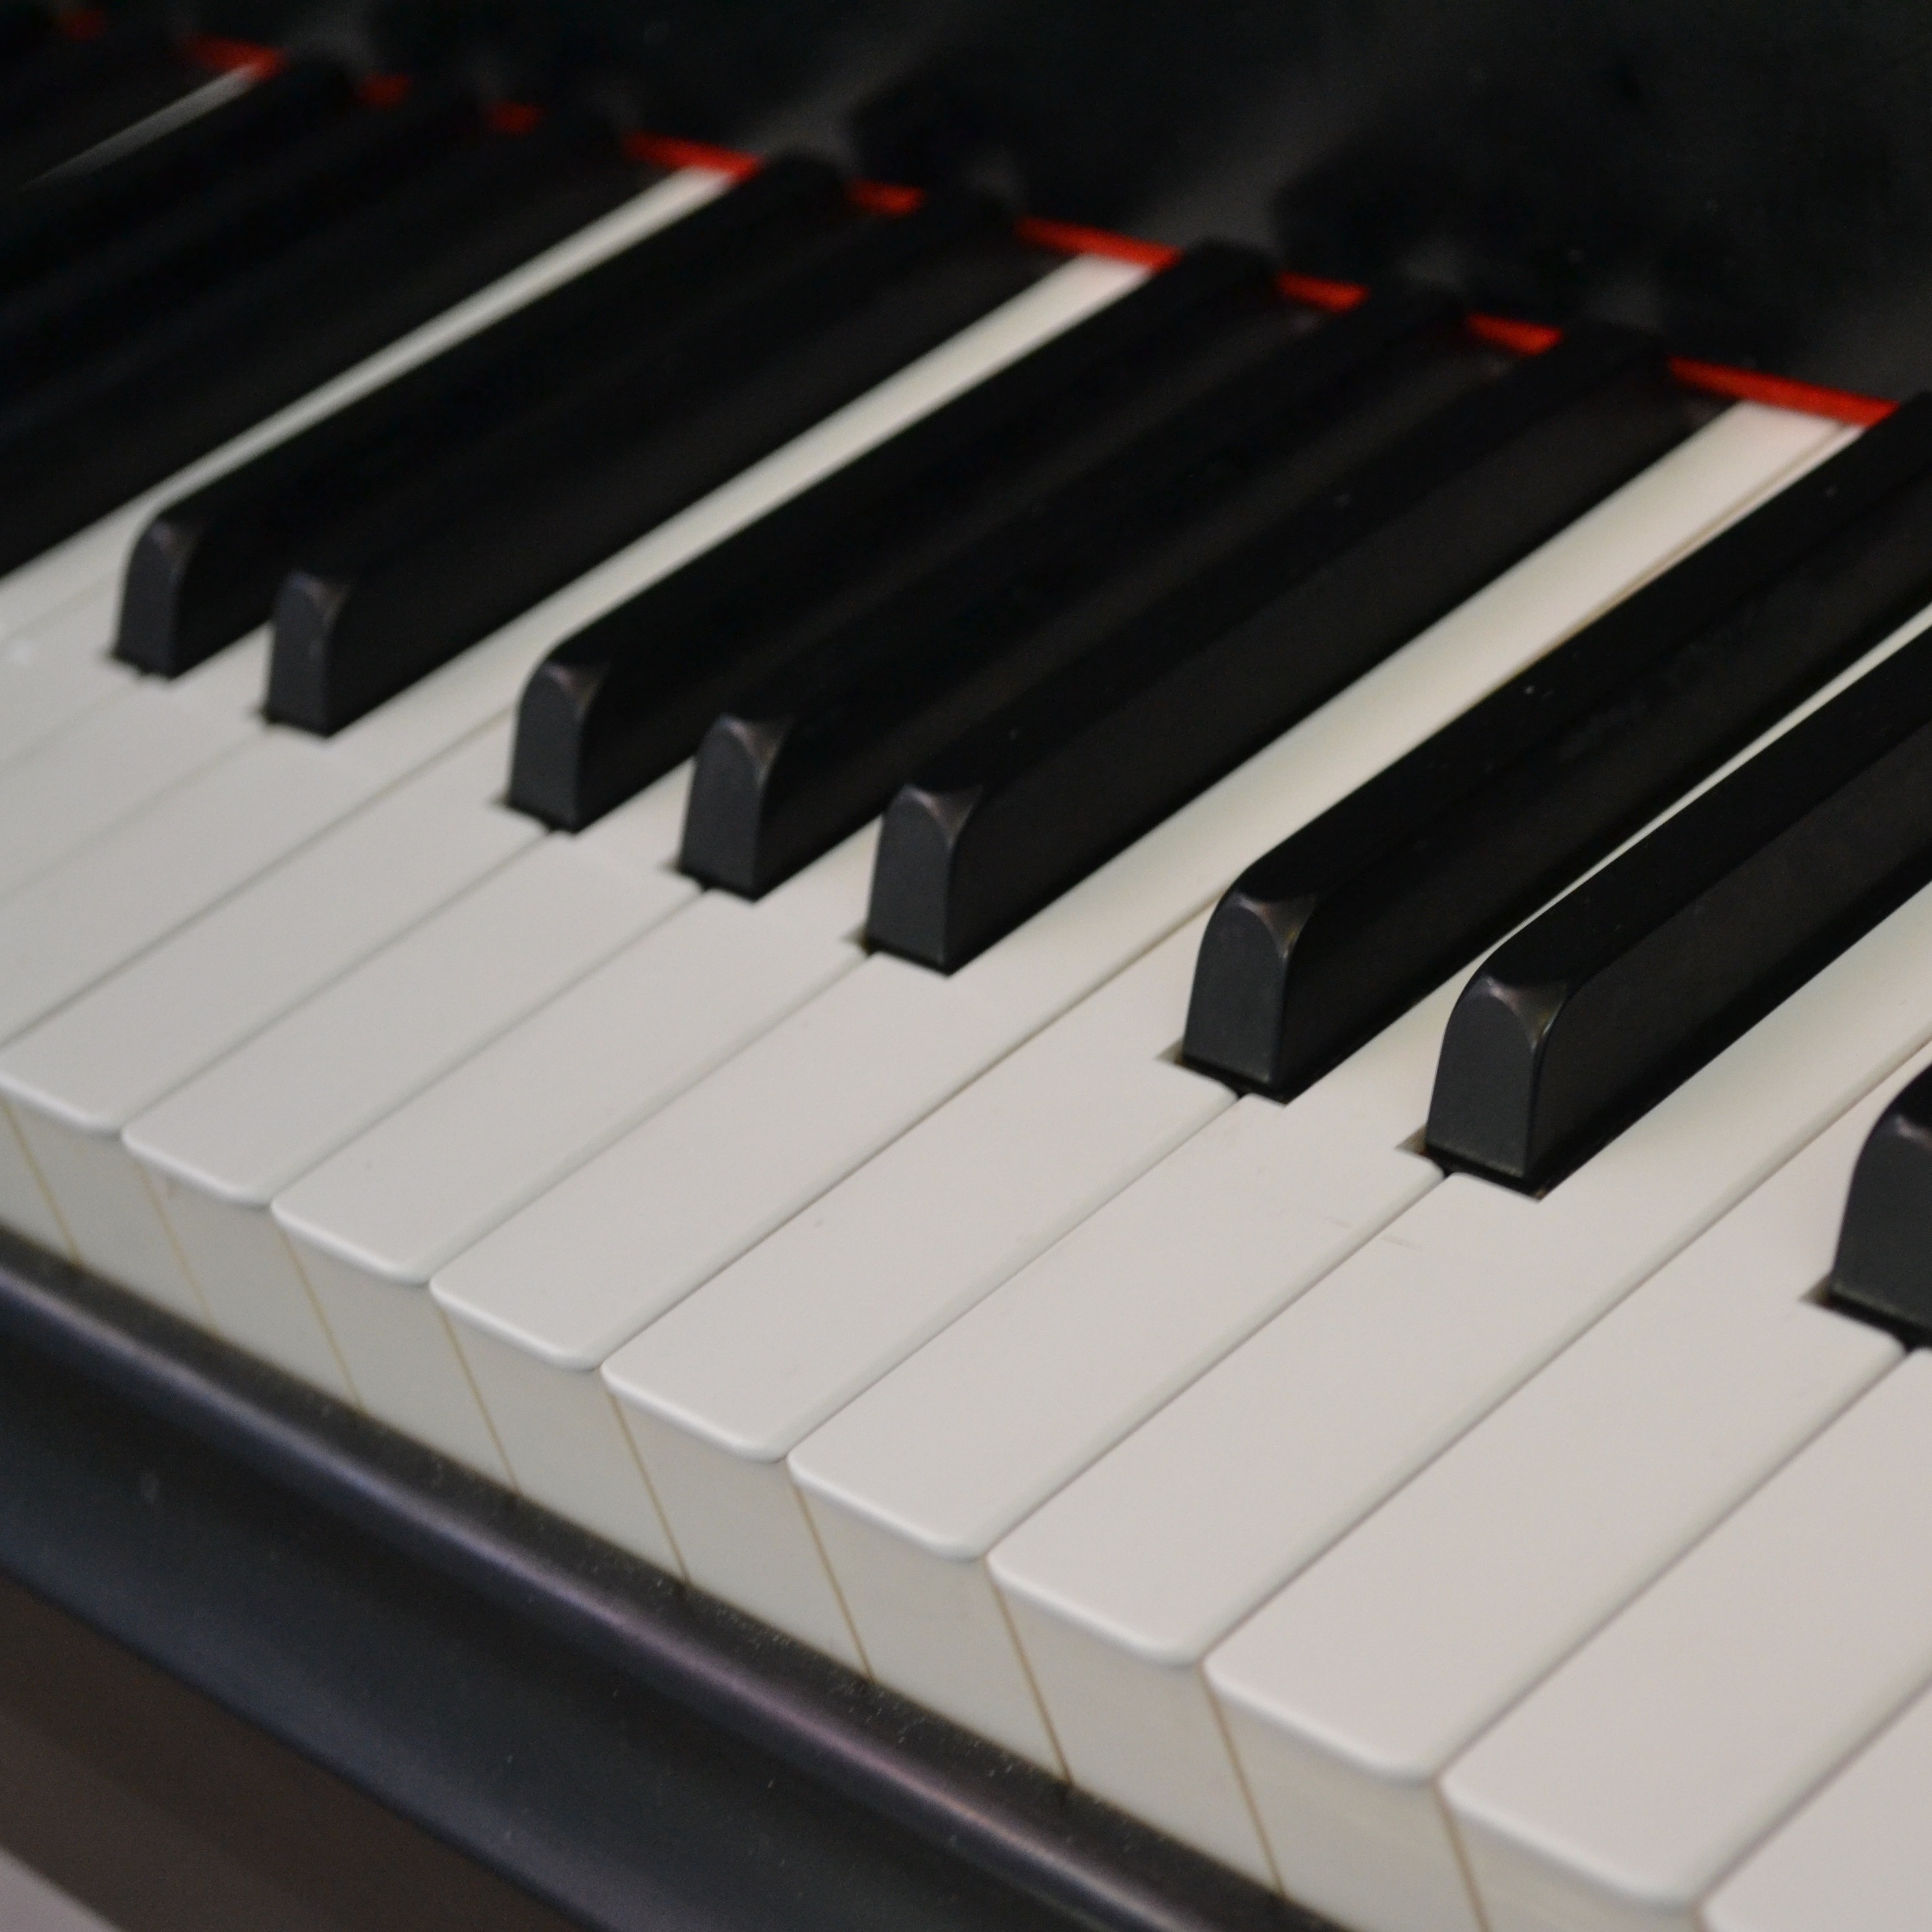 20 Beautiful Piano Melodies to Fall in Love and Relax with